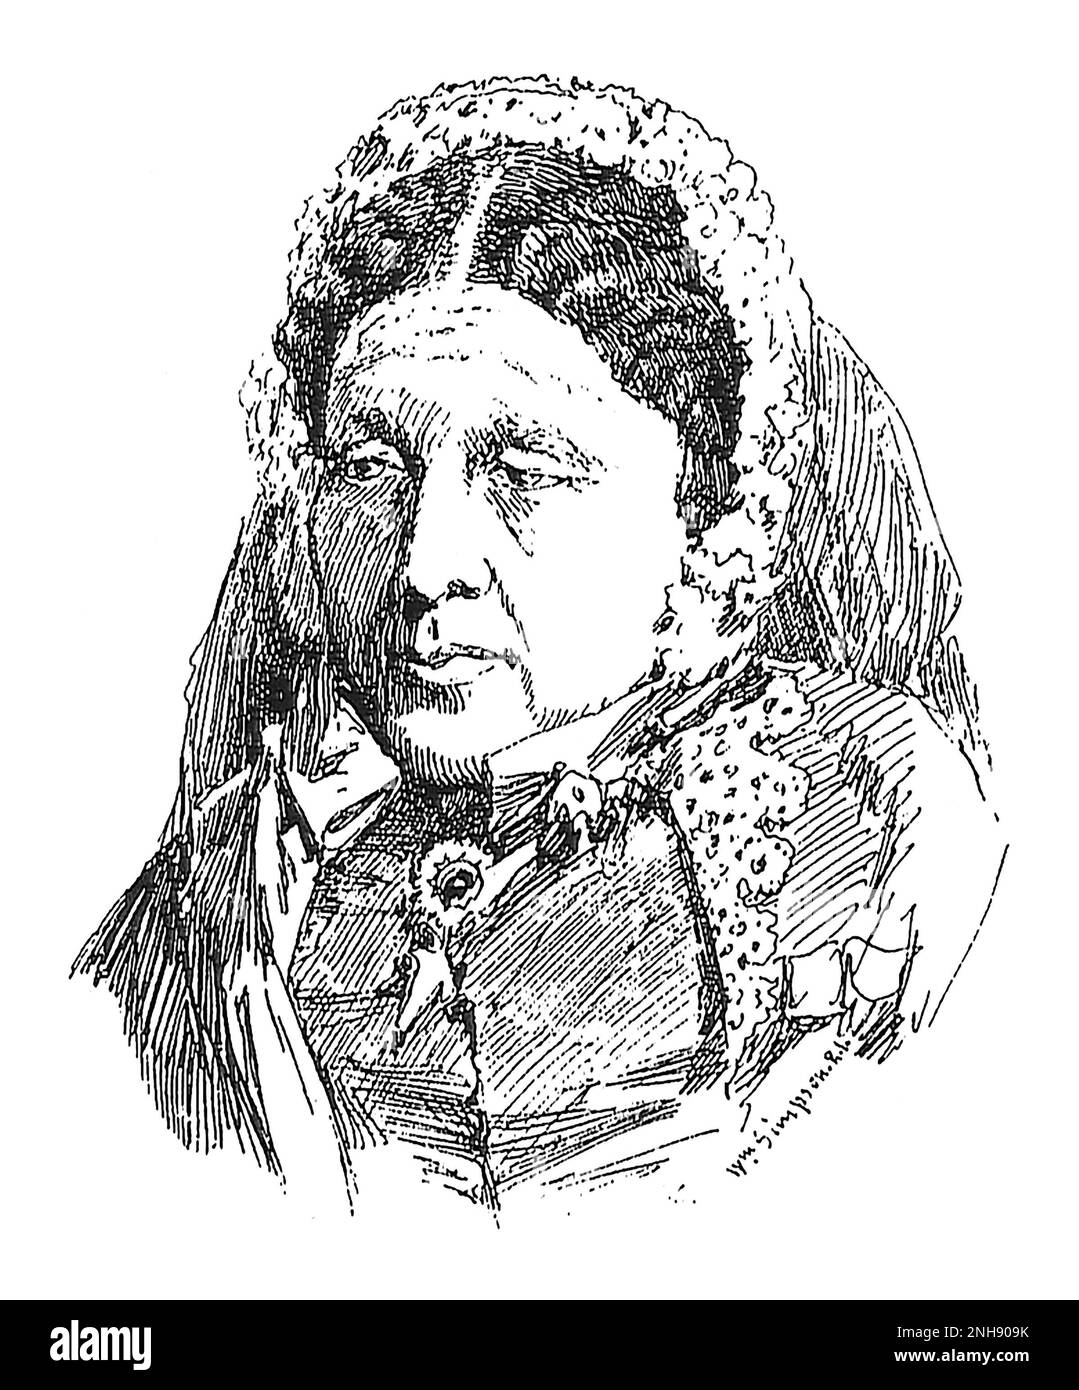 Sketch of Mary Seacole by Crimean war artist William Simpson (1823-1899), c. 1855. Mary Seacole (1805-1881) was a British-Jamaican businesswoman and nurse. During the Crimean War, she ran a hotel and tended to the wounded. Her autobiography, Wonderful Adventures of Mrs. Seacole in Many Lands (1857), is one of the earliest autobiographies of a mixed-race woman. In 2004 she was voted the greatest black Briton. Stock Photo